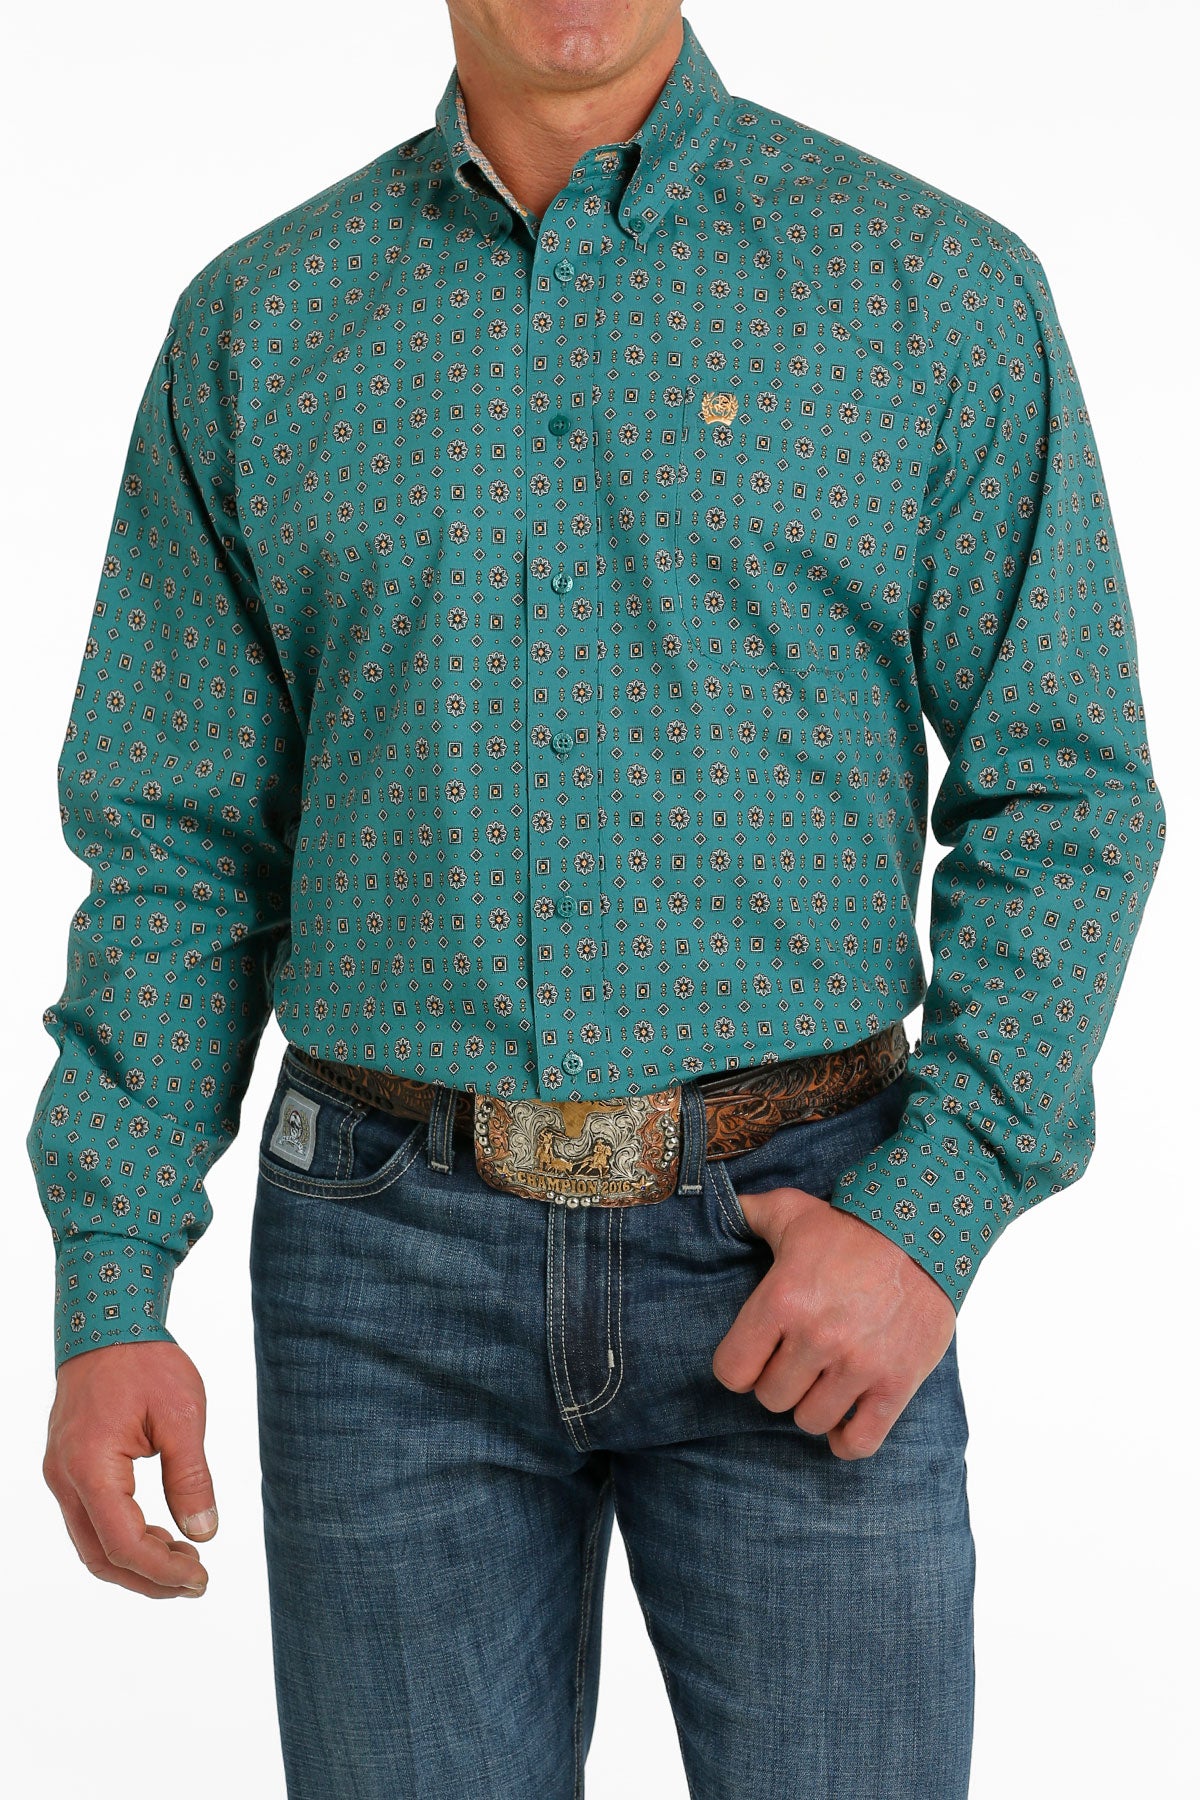 Cinch Brands, Yee Haw Ranch Outfitters